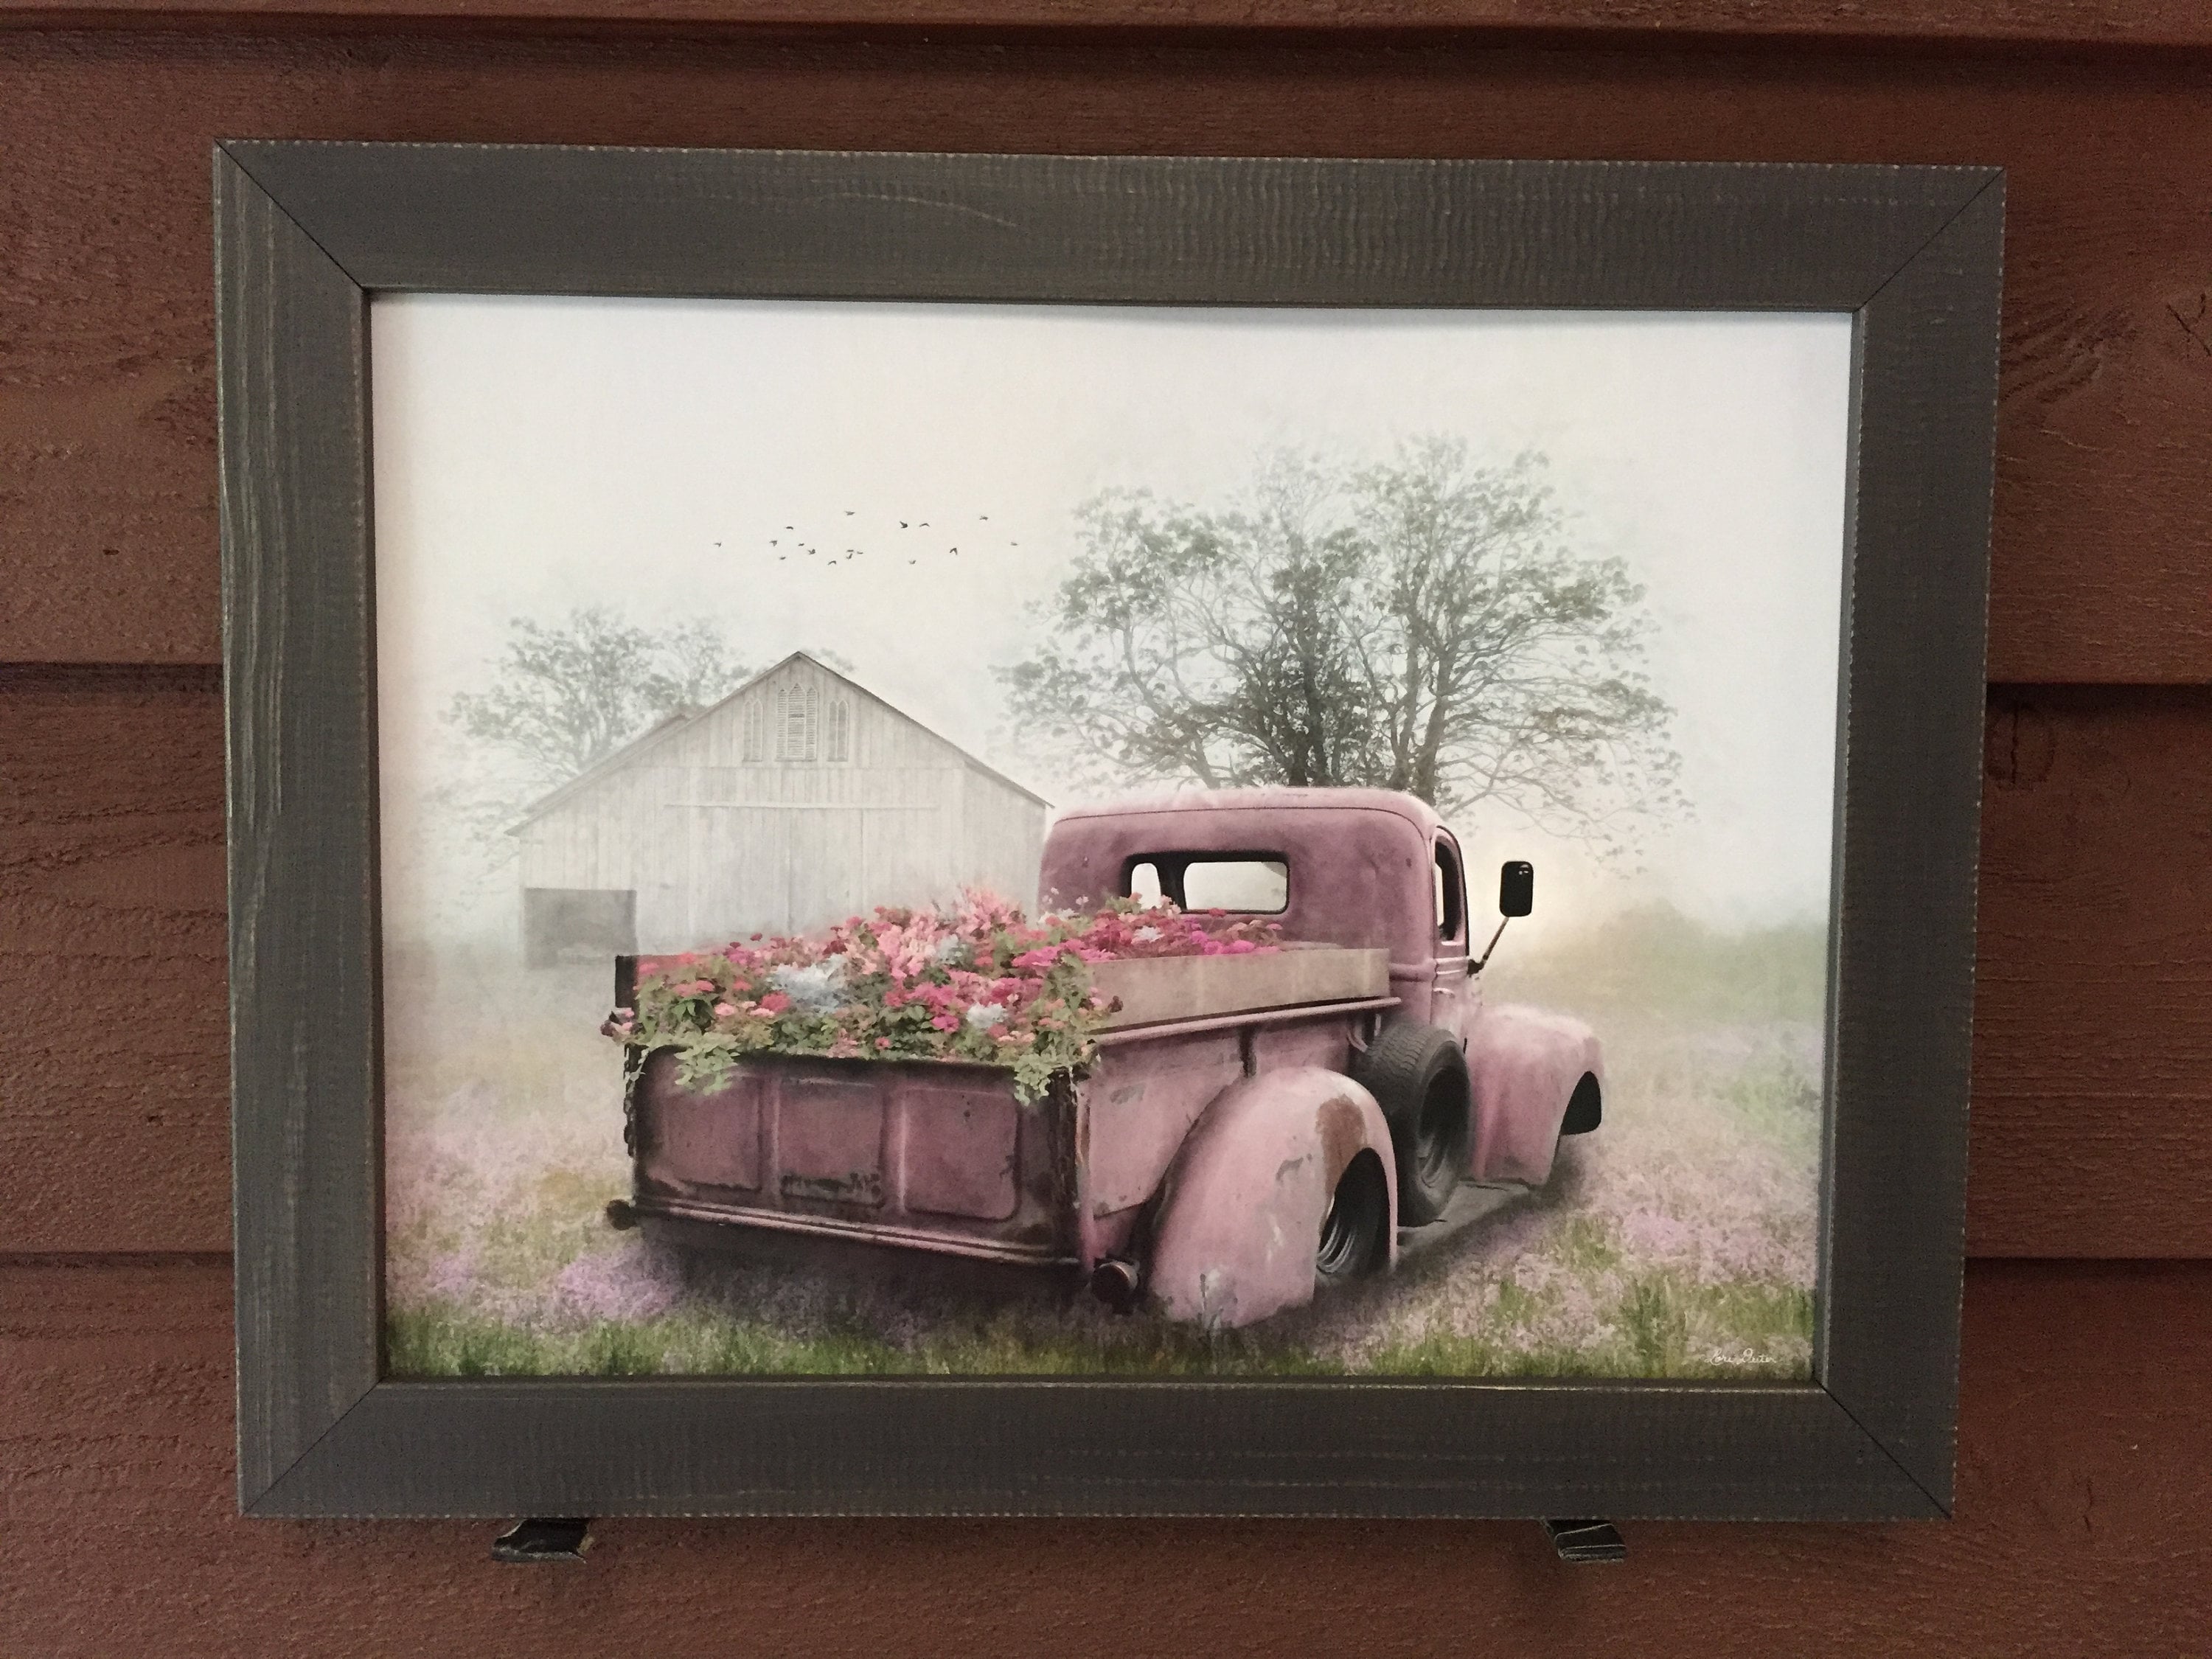 Framed Picture of Old Truck With Beautiful Flowers in Bed of Etsy